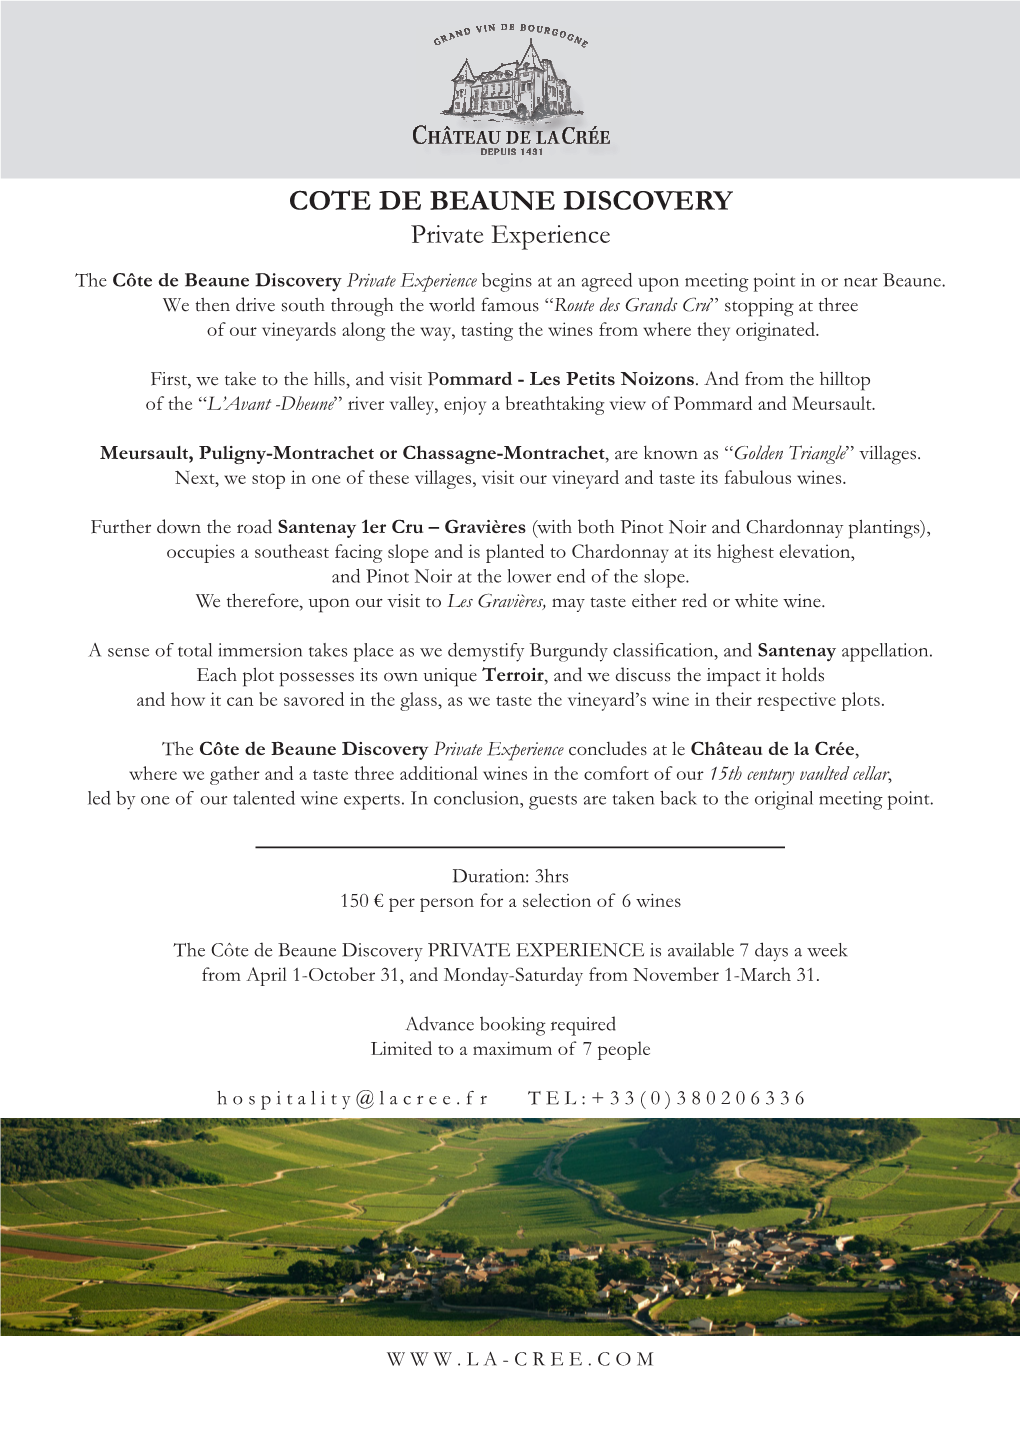 COTE DE BEAUNE DISCOVERY Private Experience